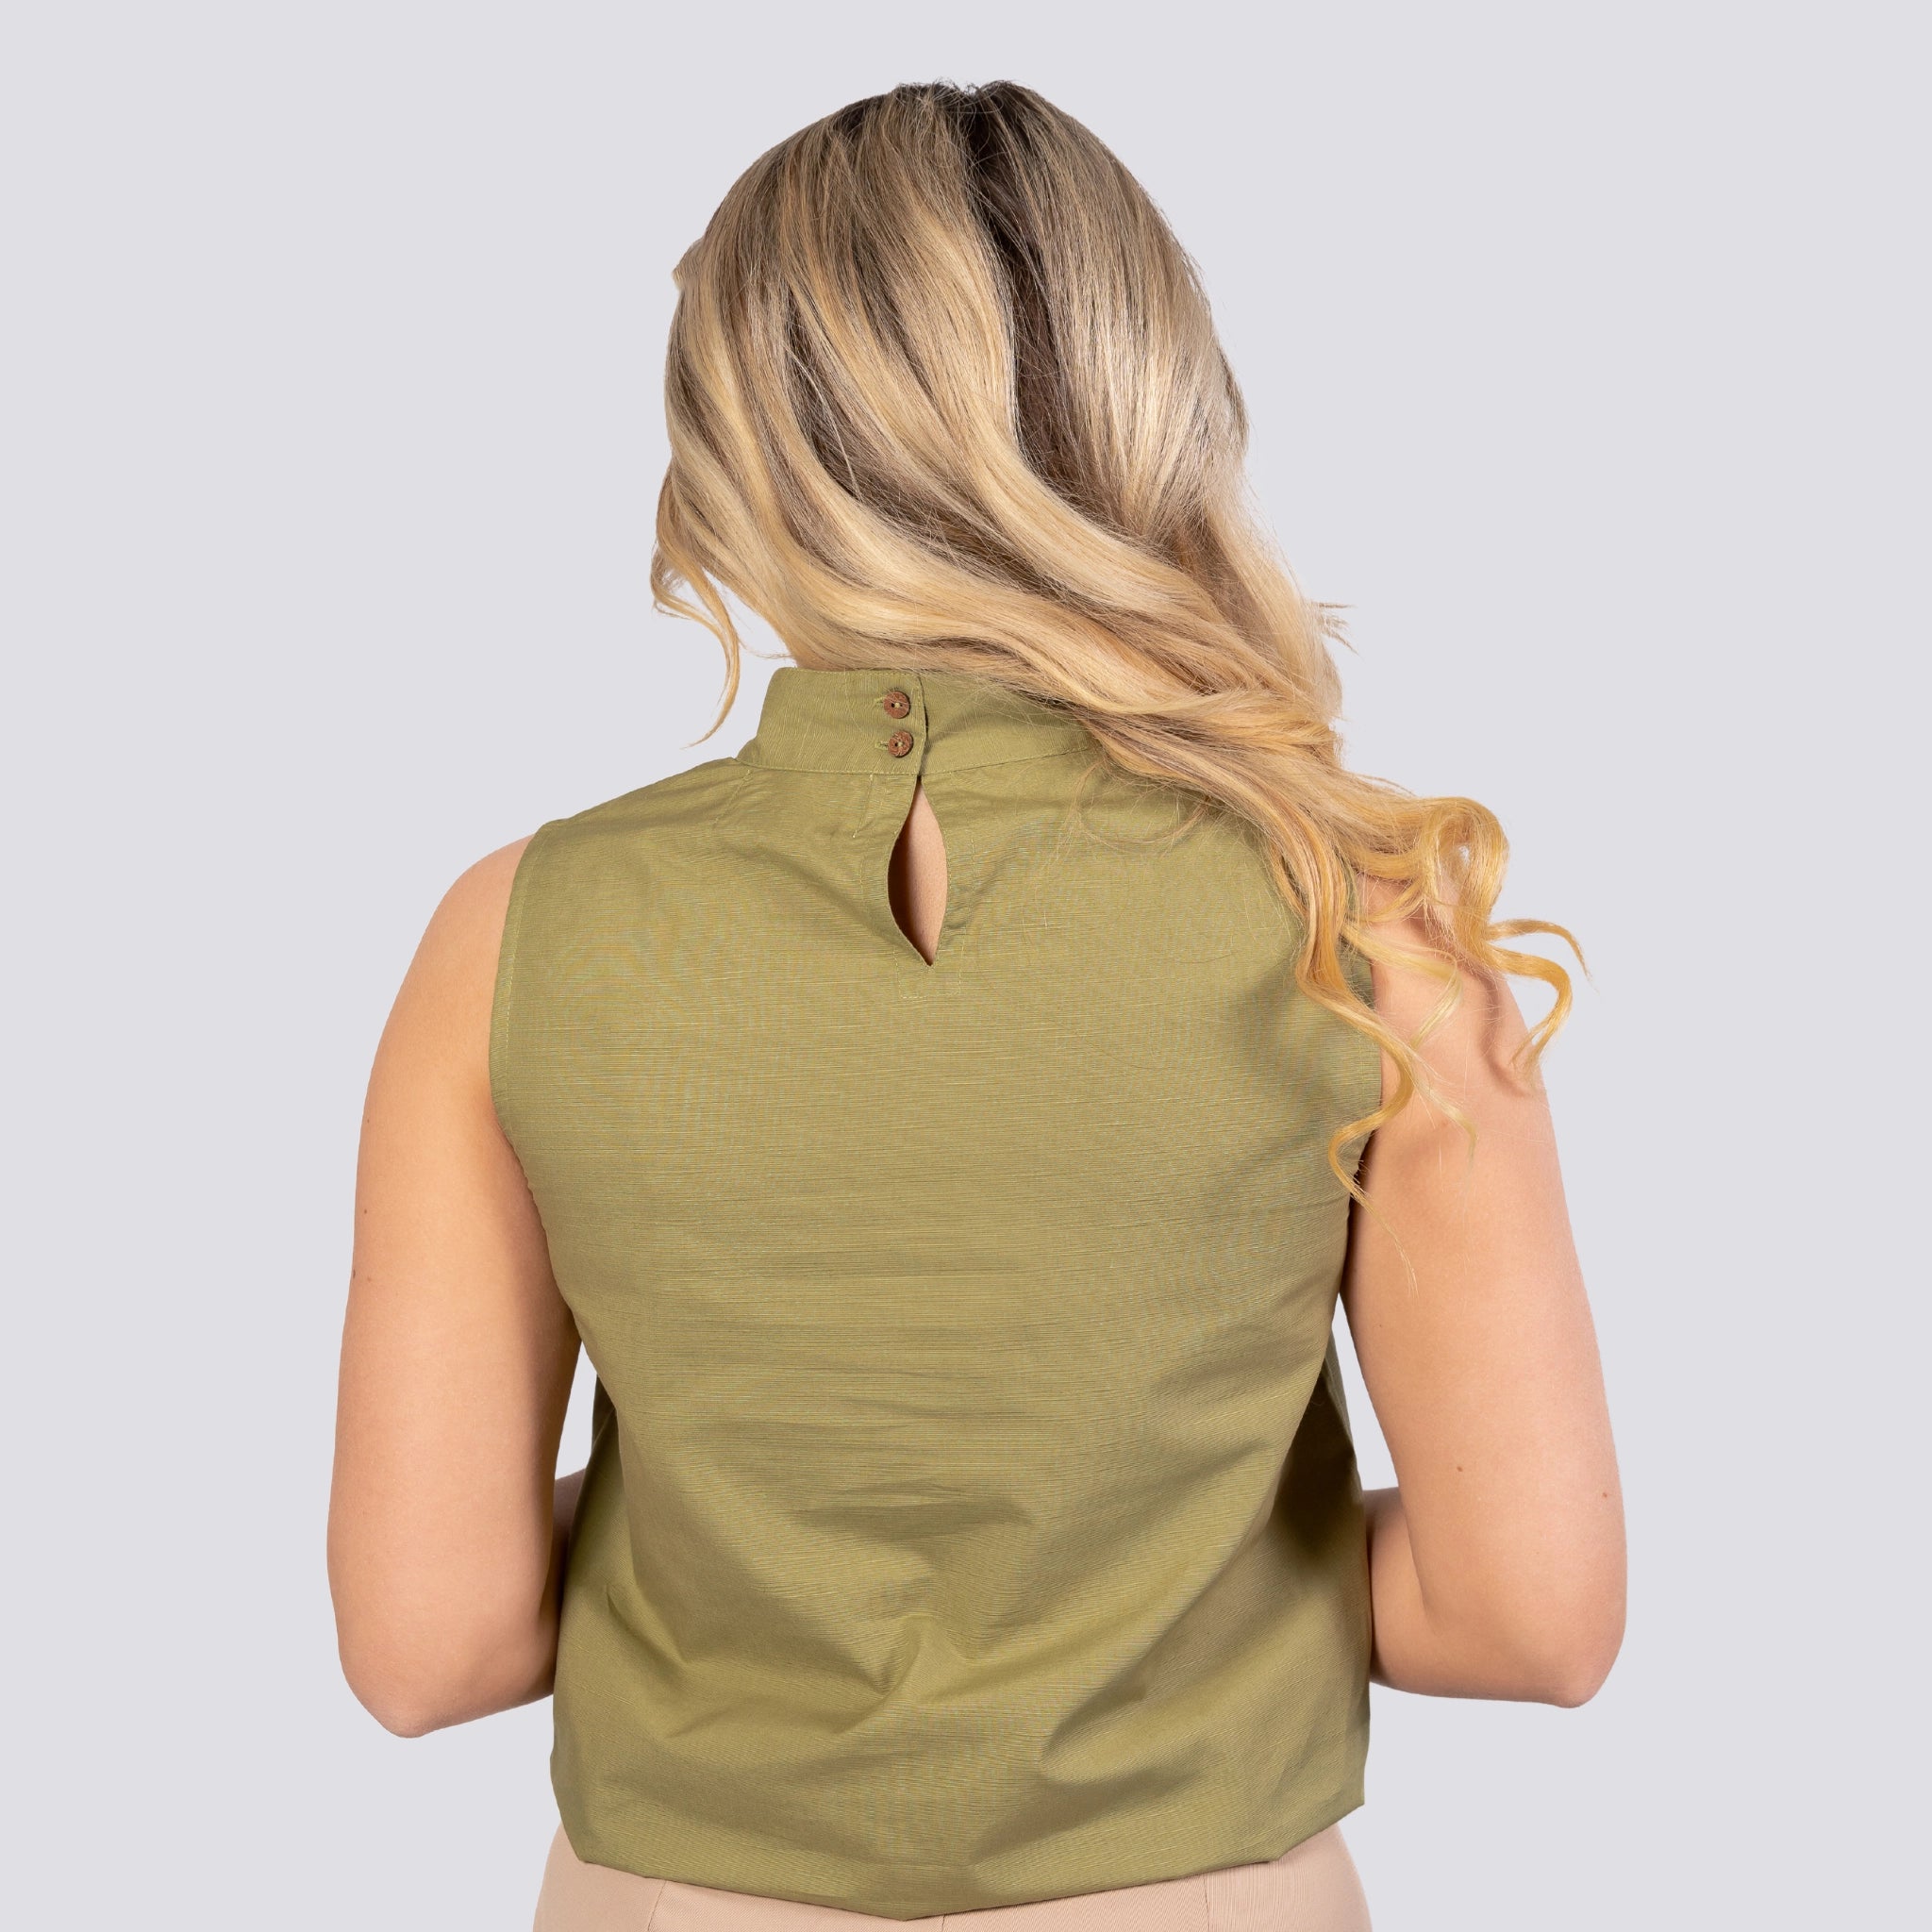 Woman with blonde hair viewed from behind, wearing a sleeveless Karee Pear Green Harmony Sleeveless Top For Women made of eco-friendly linen and cotton, featuring a buttoned keyhole neckline.